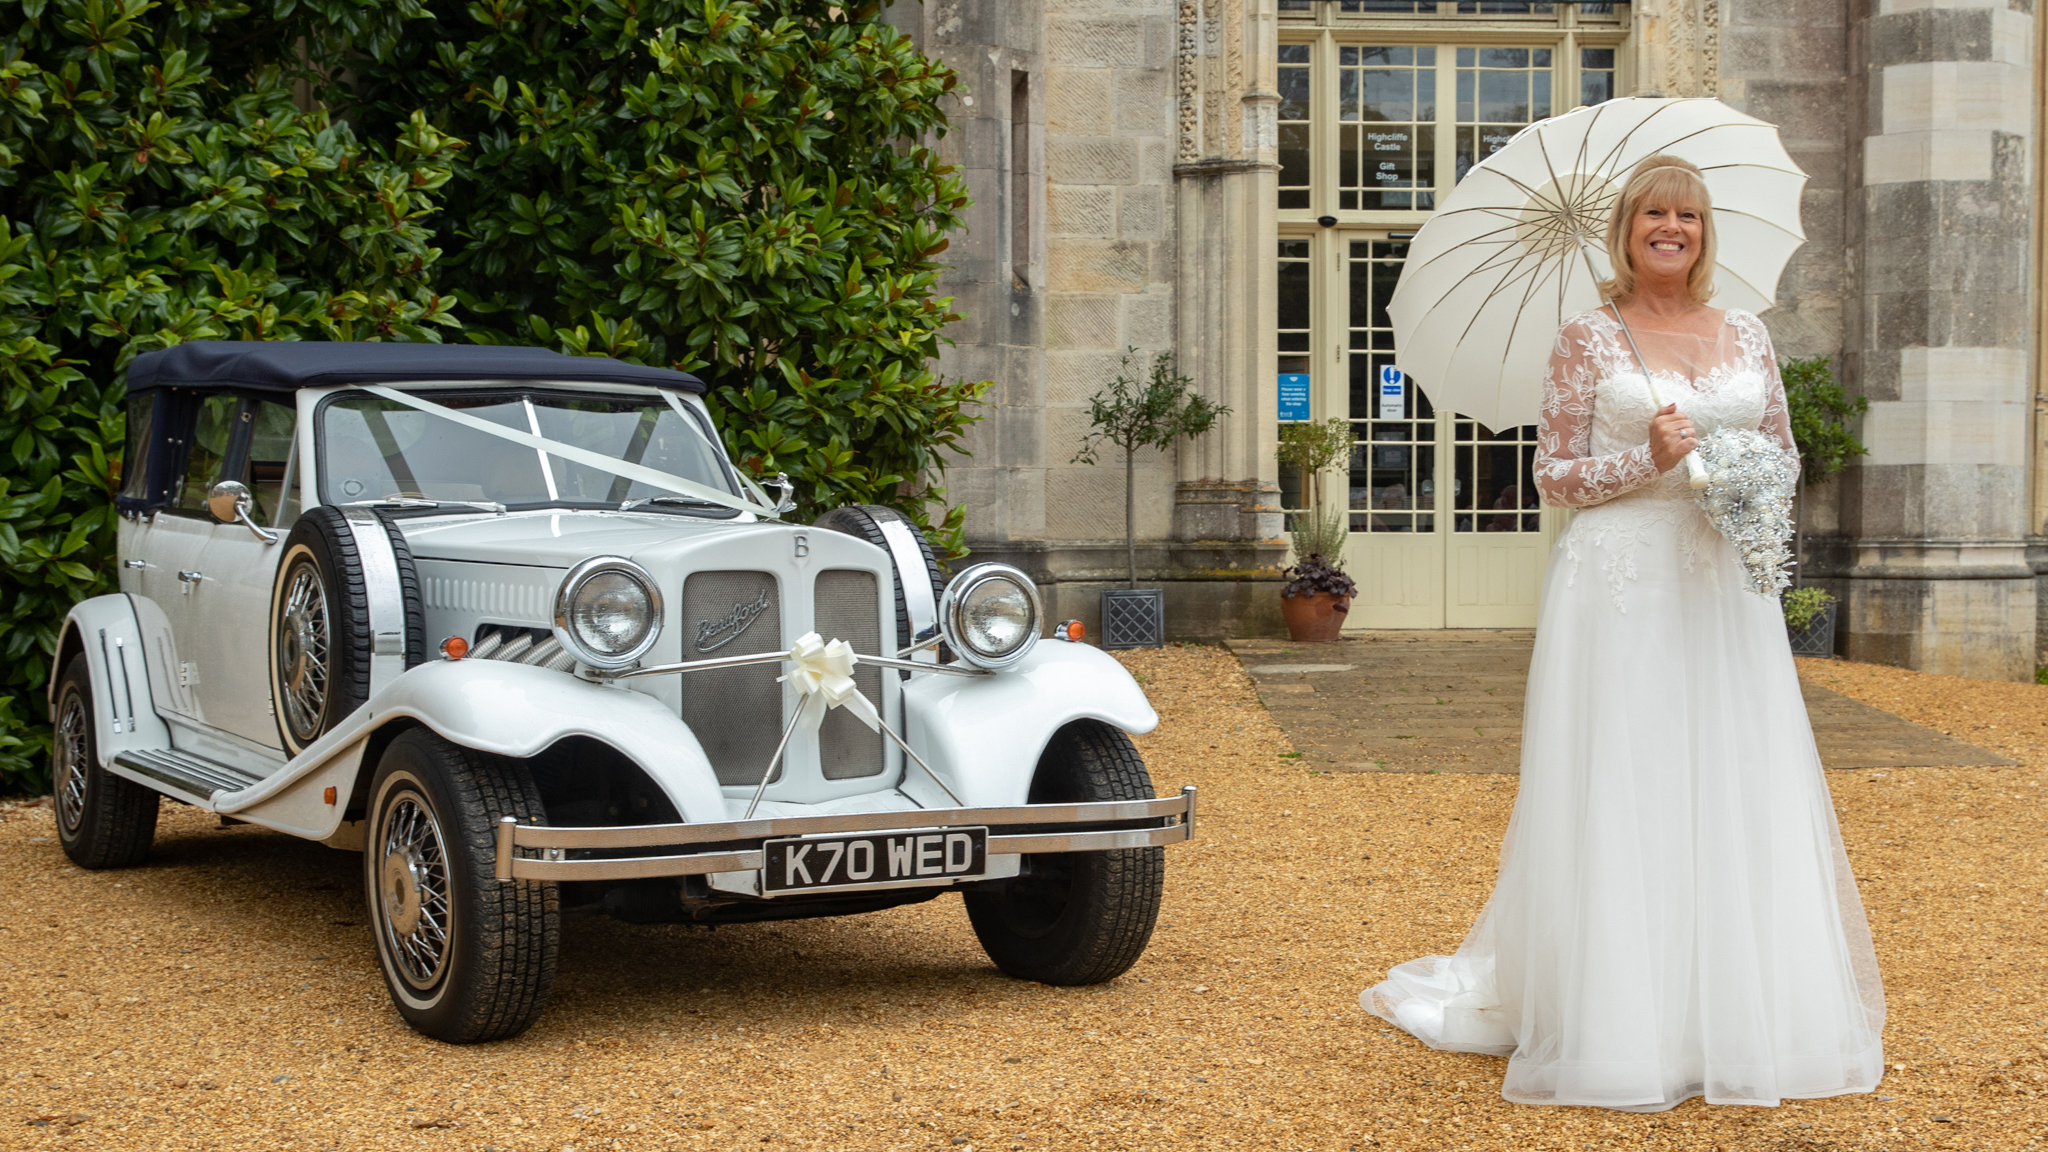 White vintage Beauford convertible with roof up decorated with white ribbon and bow at a local Dartford wedding. Smiling bride standing next to the vehicle with a white umbrella ho